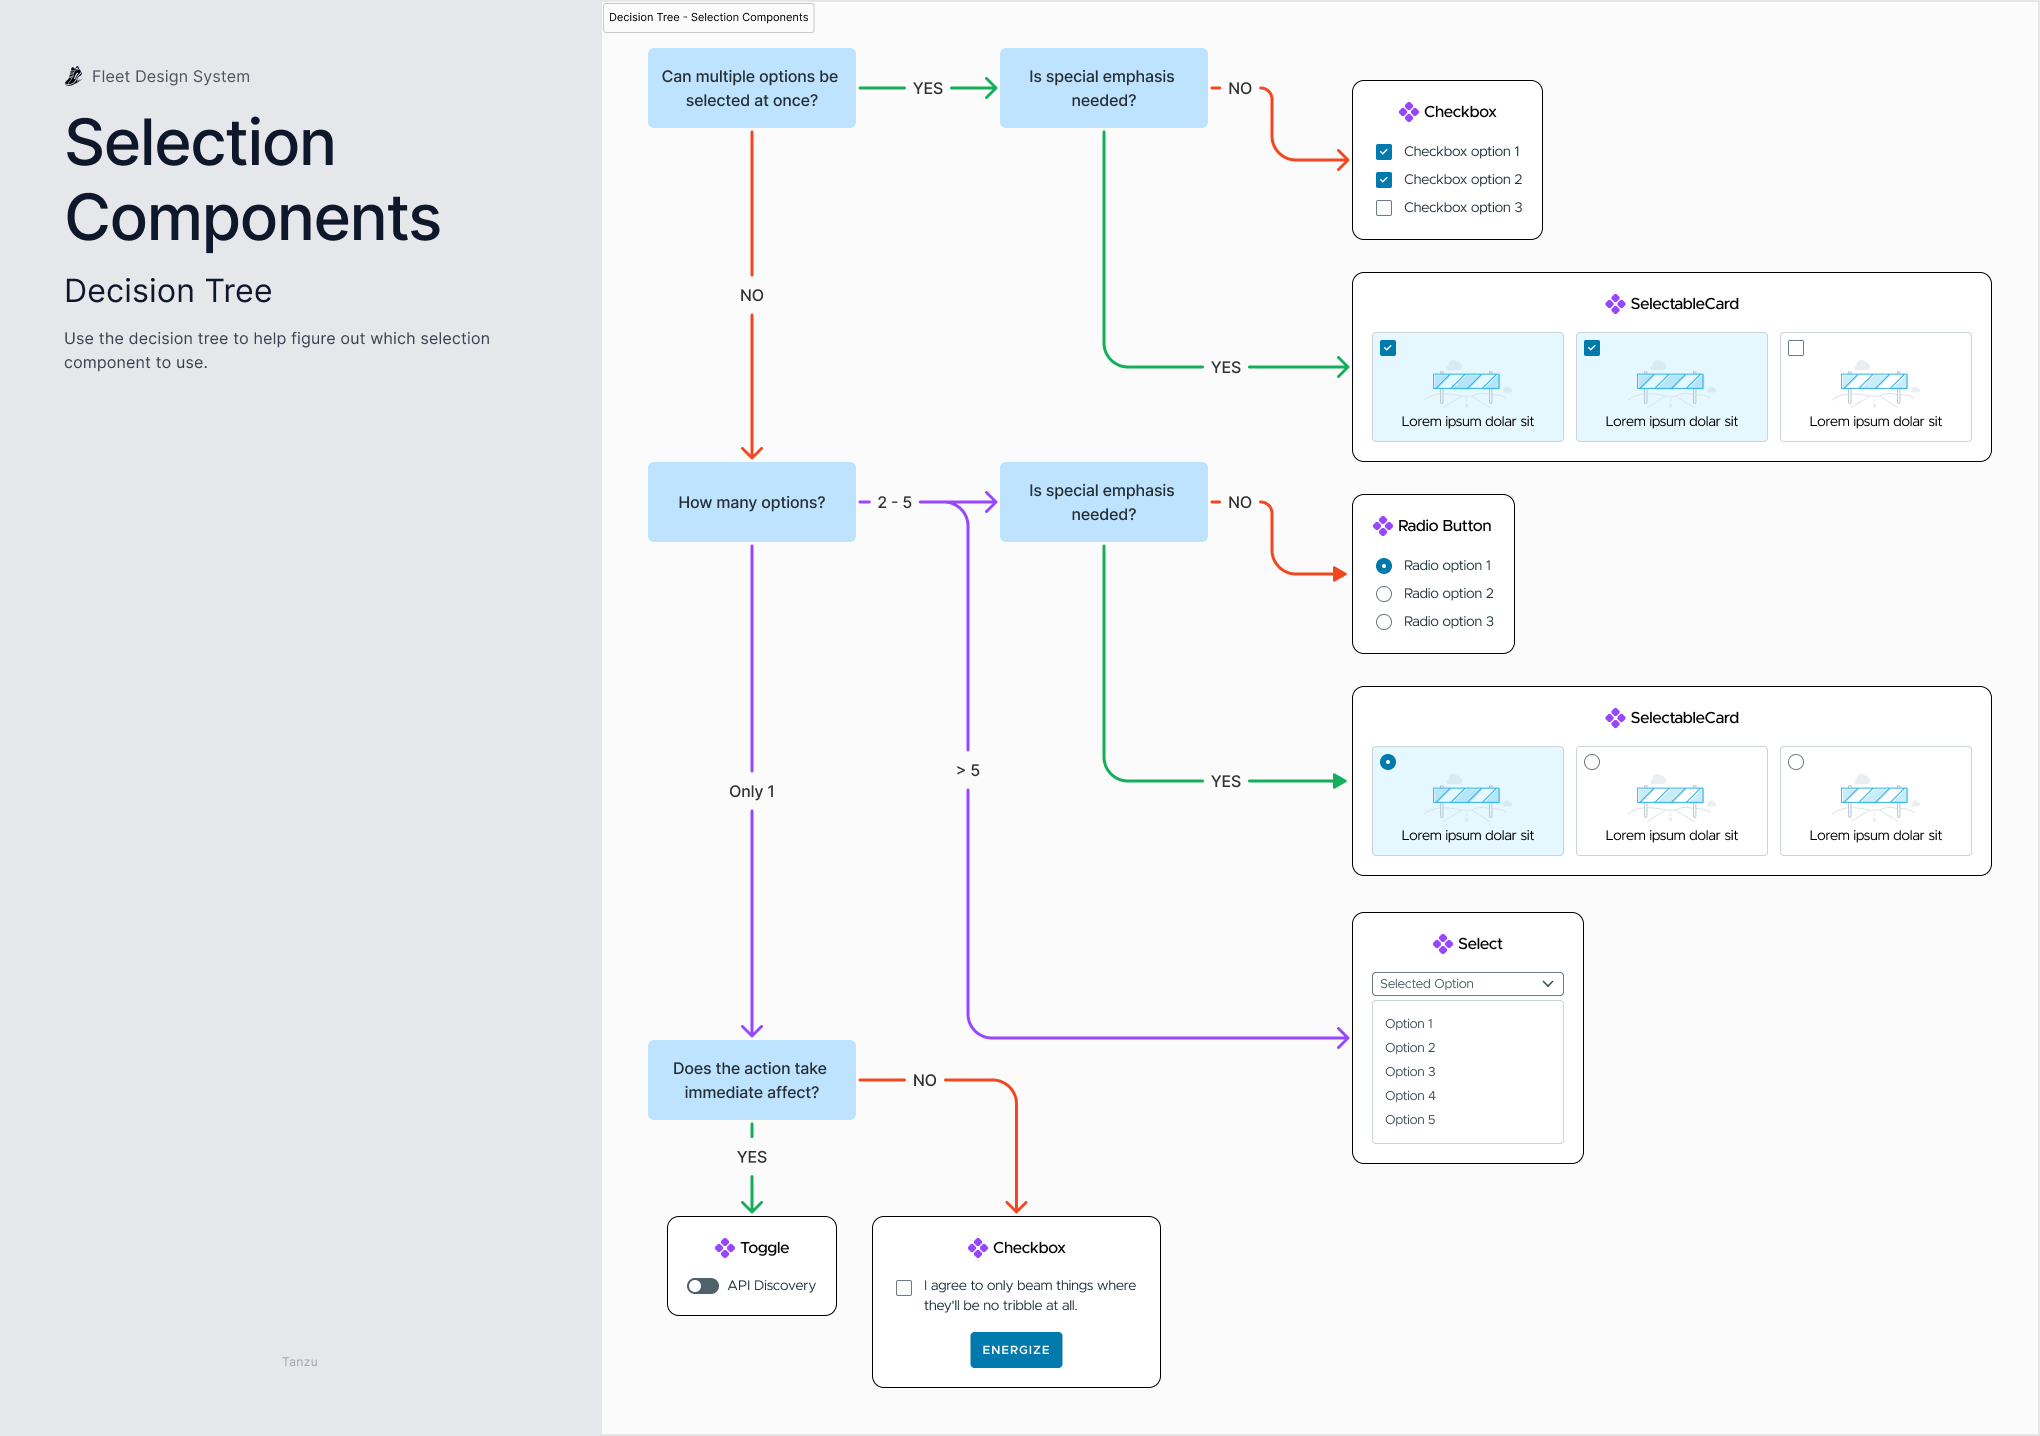 A decision tree helping designers pick the best selection component for their needs